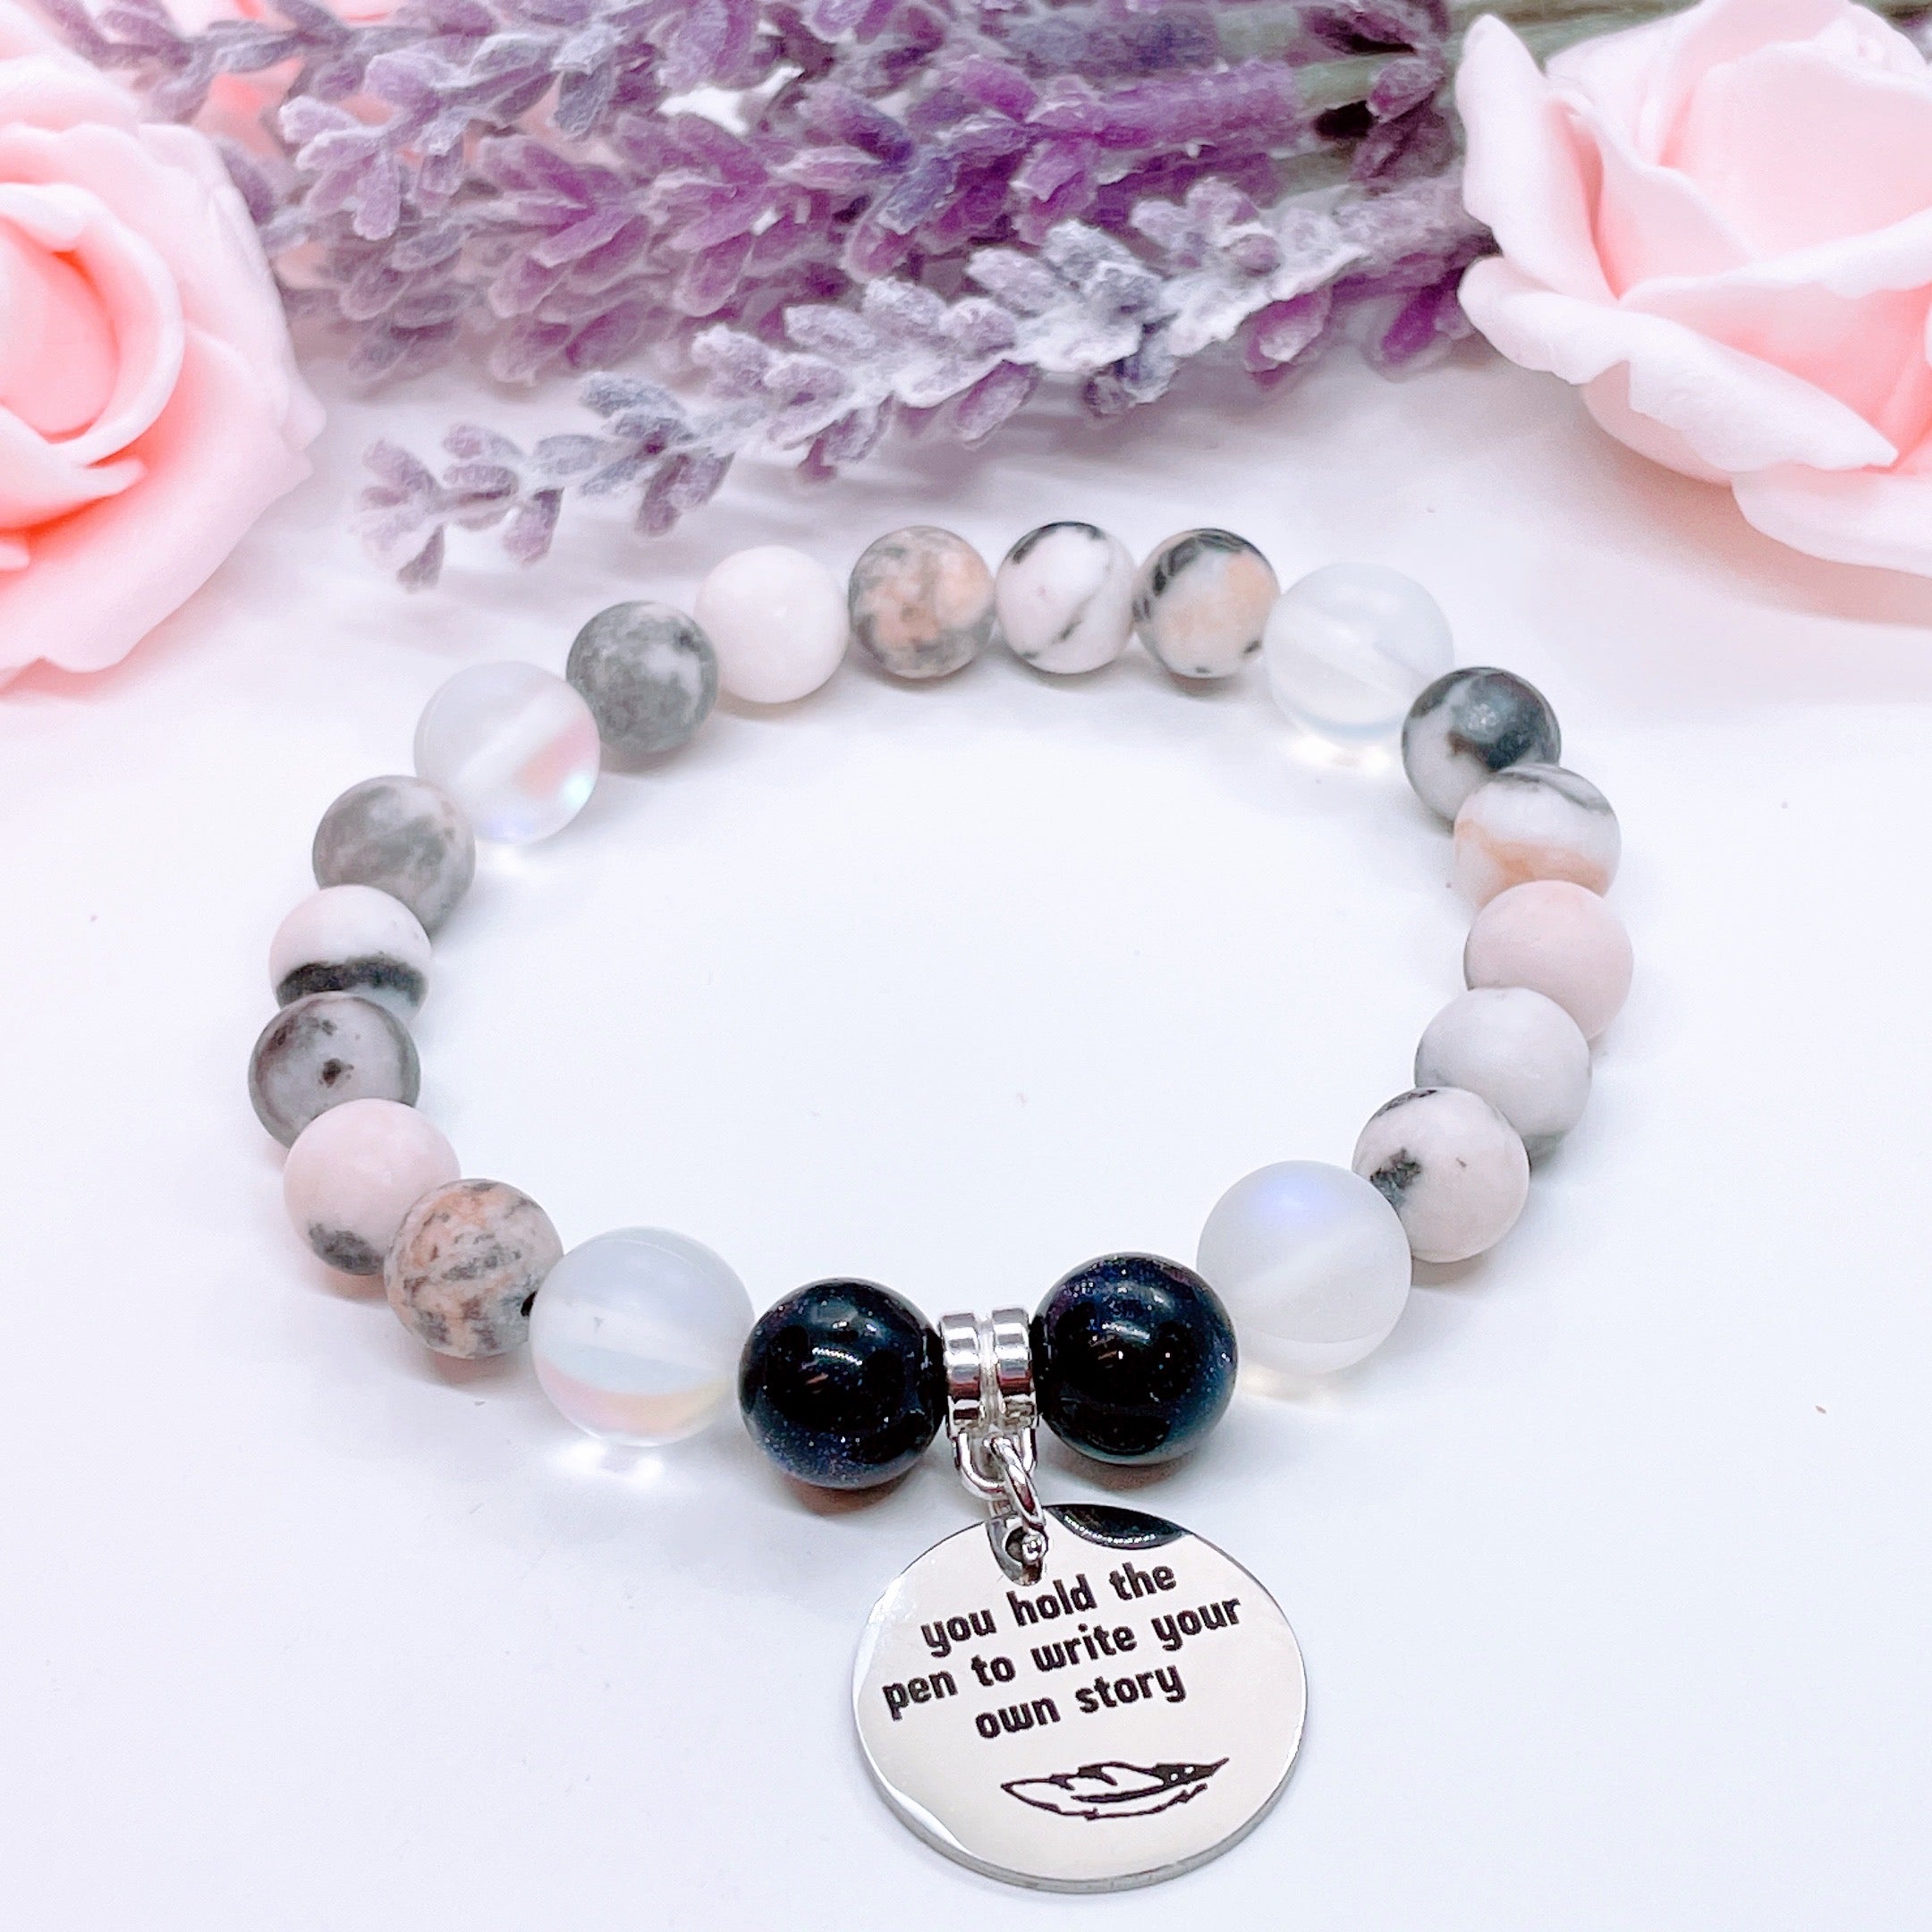 You Hold the Pen to Write your Own Story Charm Bracelet